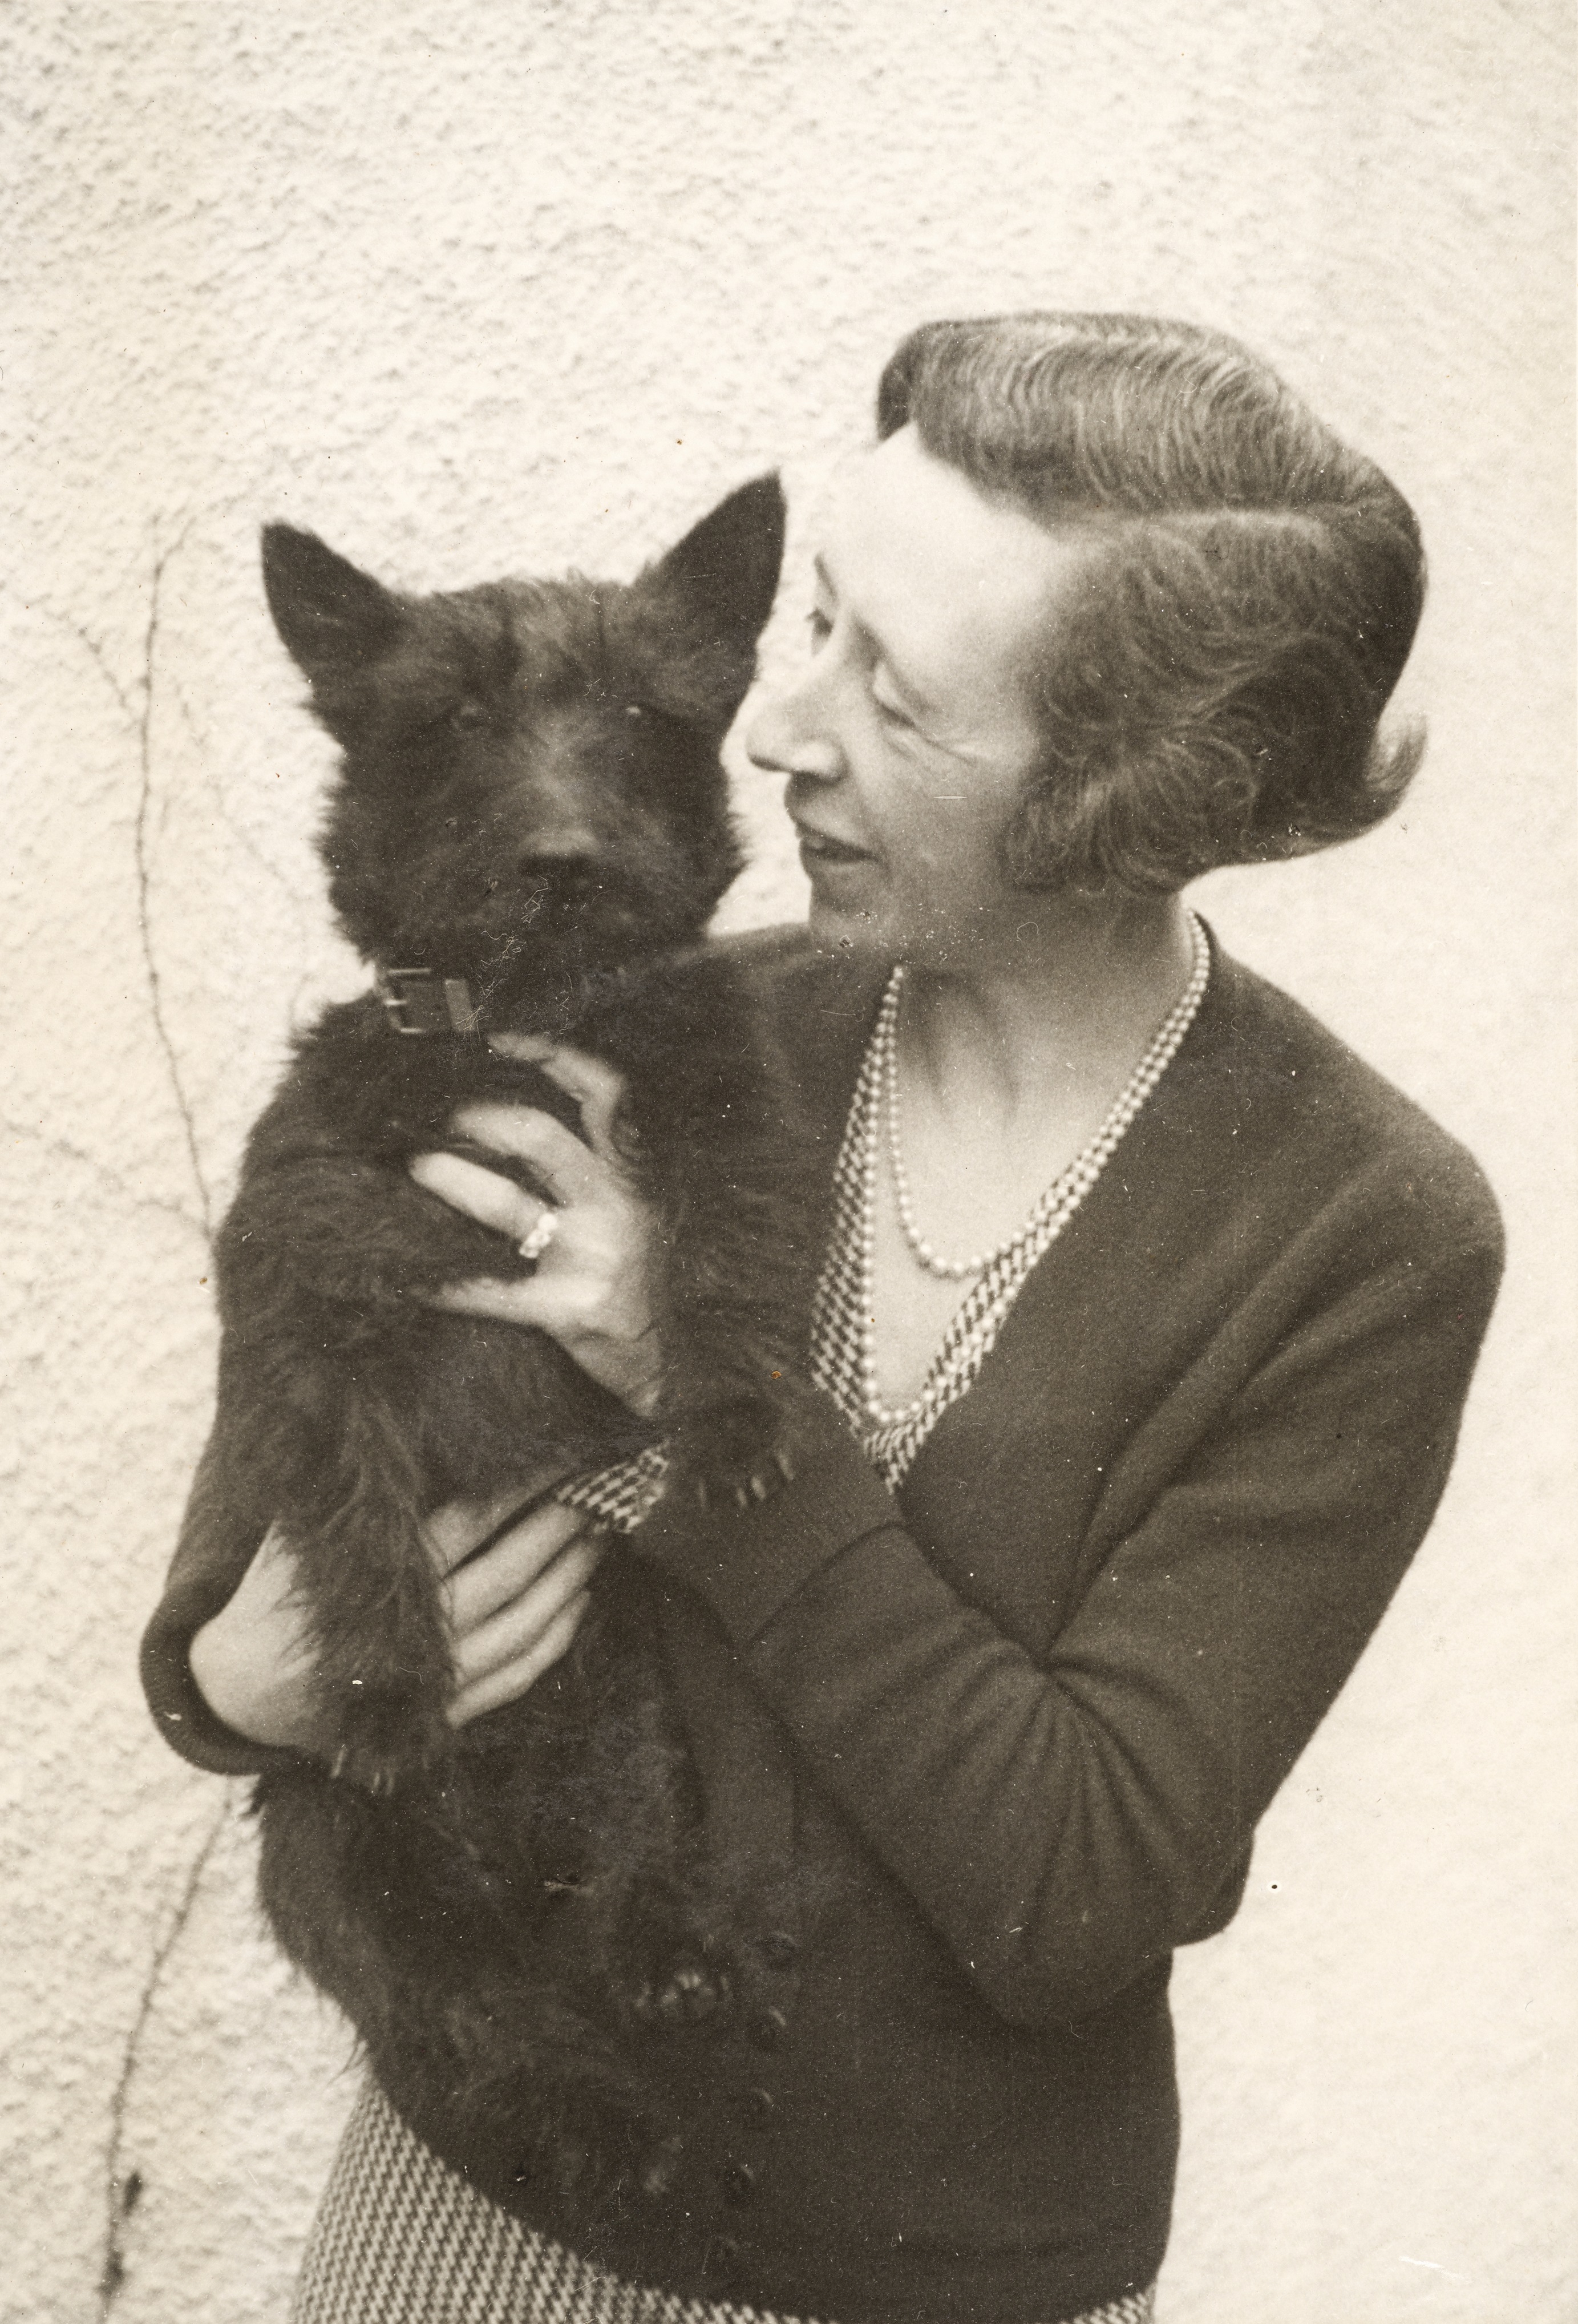 Woman dressed in check dress, cardigan and pearl necklace holding and smiling at a black Scottish Terrior dog 